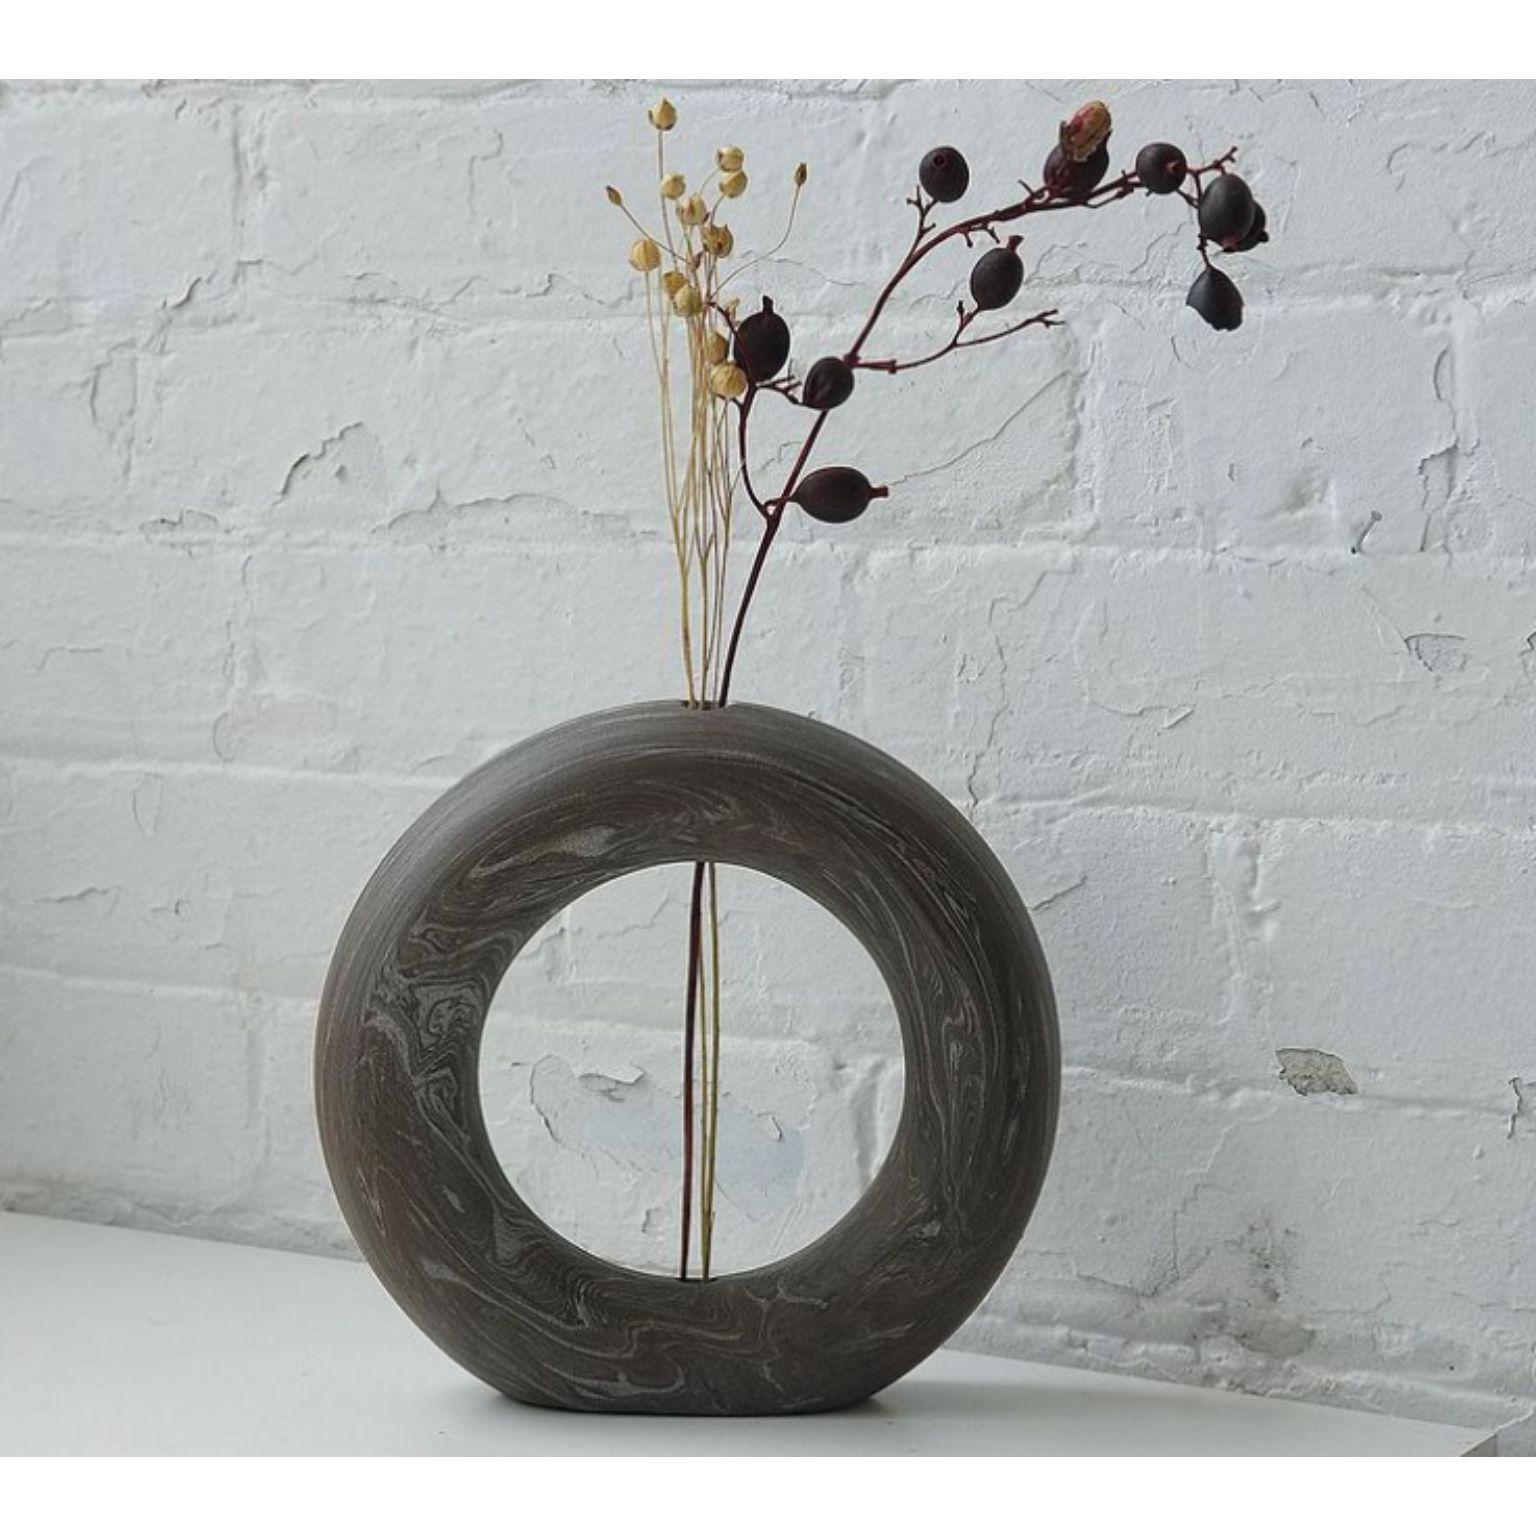 Marble ring vase by Solem Ceramics
Dimensions: D 7.5 x W 23 x H 23 cm.
Materials: Black and white stoneware.

Solem’s work pulls from memories of the architecture and community within SWANA and Southeast Asia thorough exploring familiar shapes,